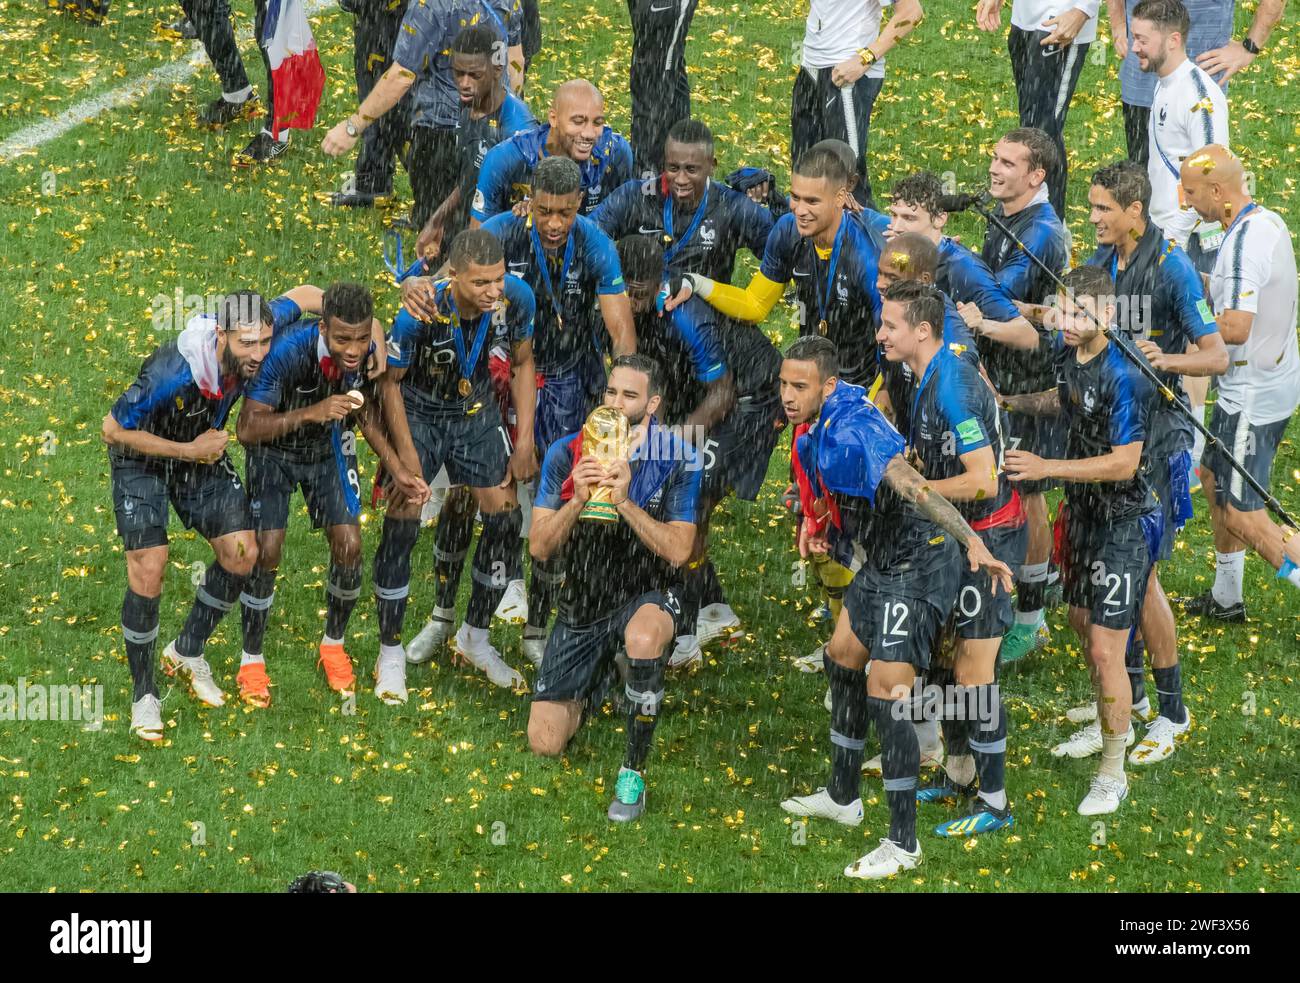 Moscow, Russia – July 15, 2018. World Cup champions France with the trophy after the World Cup final match France vs Croatia (4-2). Stock Photo